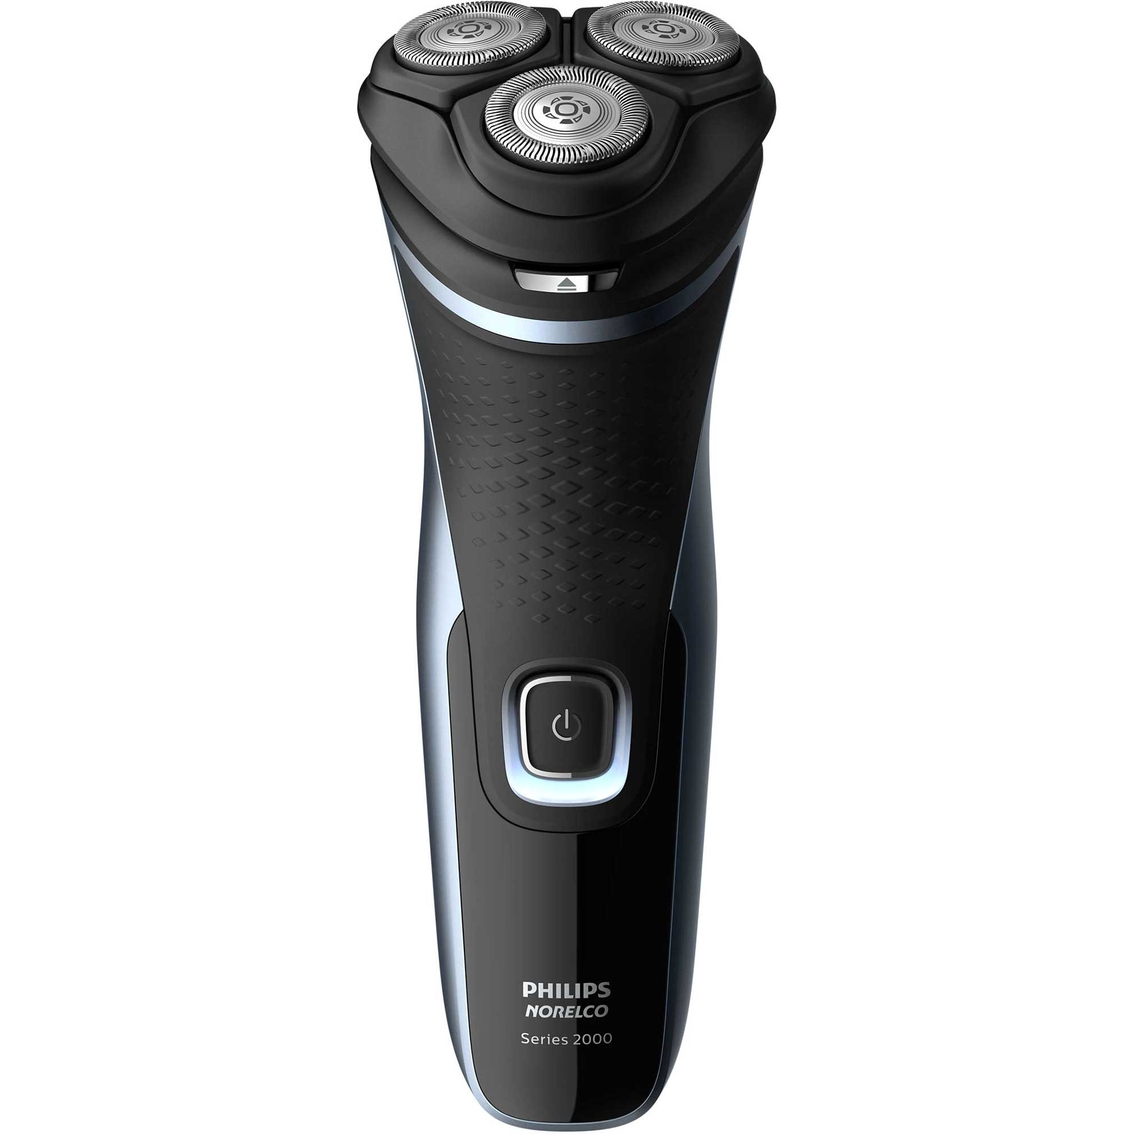 Philips Norelco 2500 Shaver - Image 2 of 9